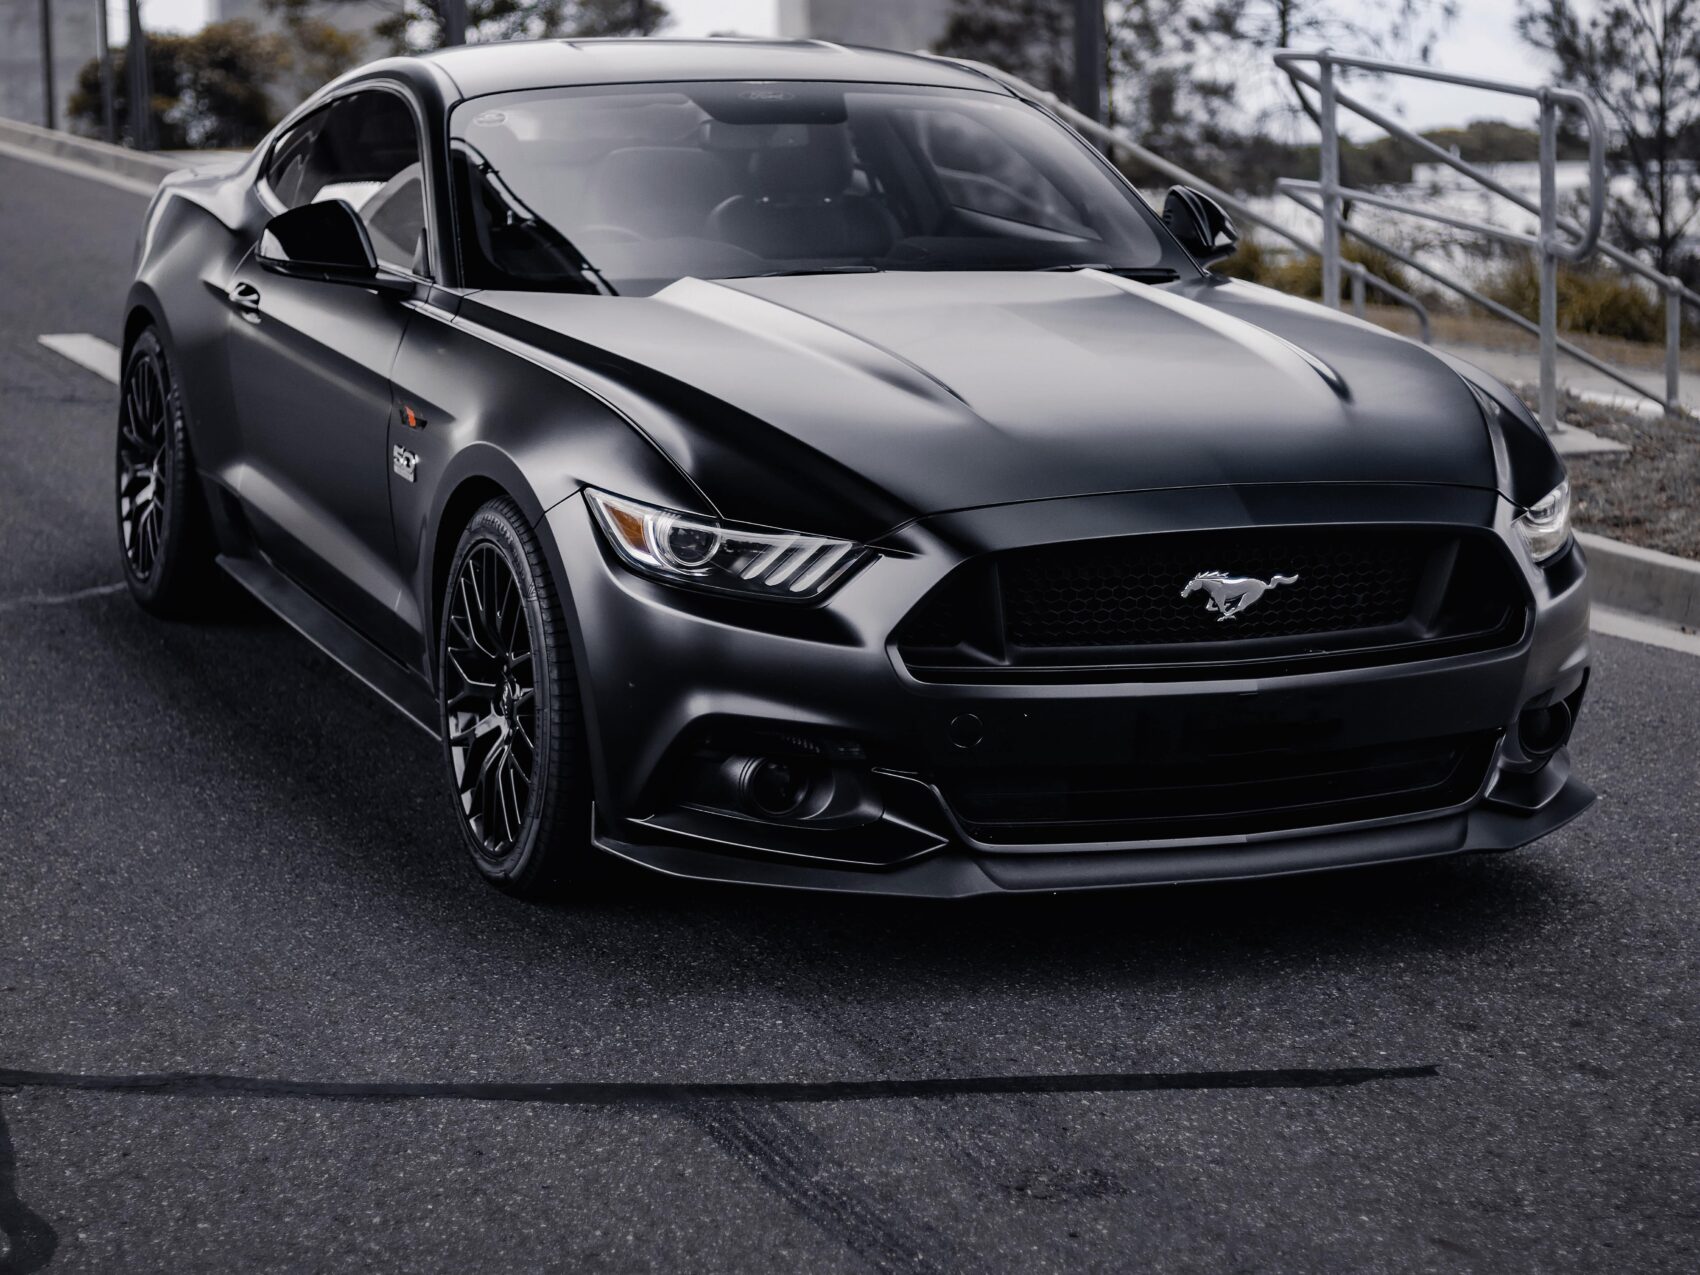 Ford Mustang Hire GT Fastback Coyote Edition 2017